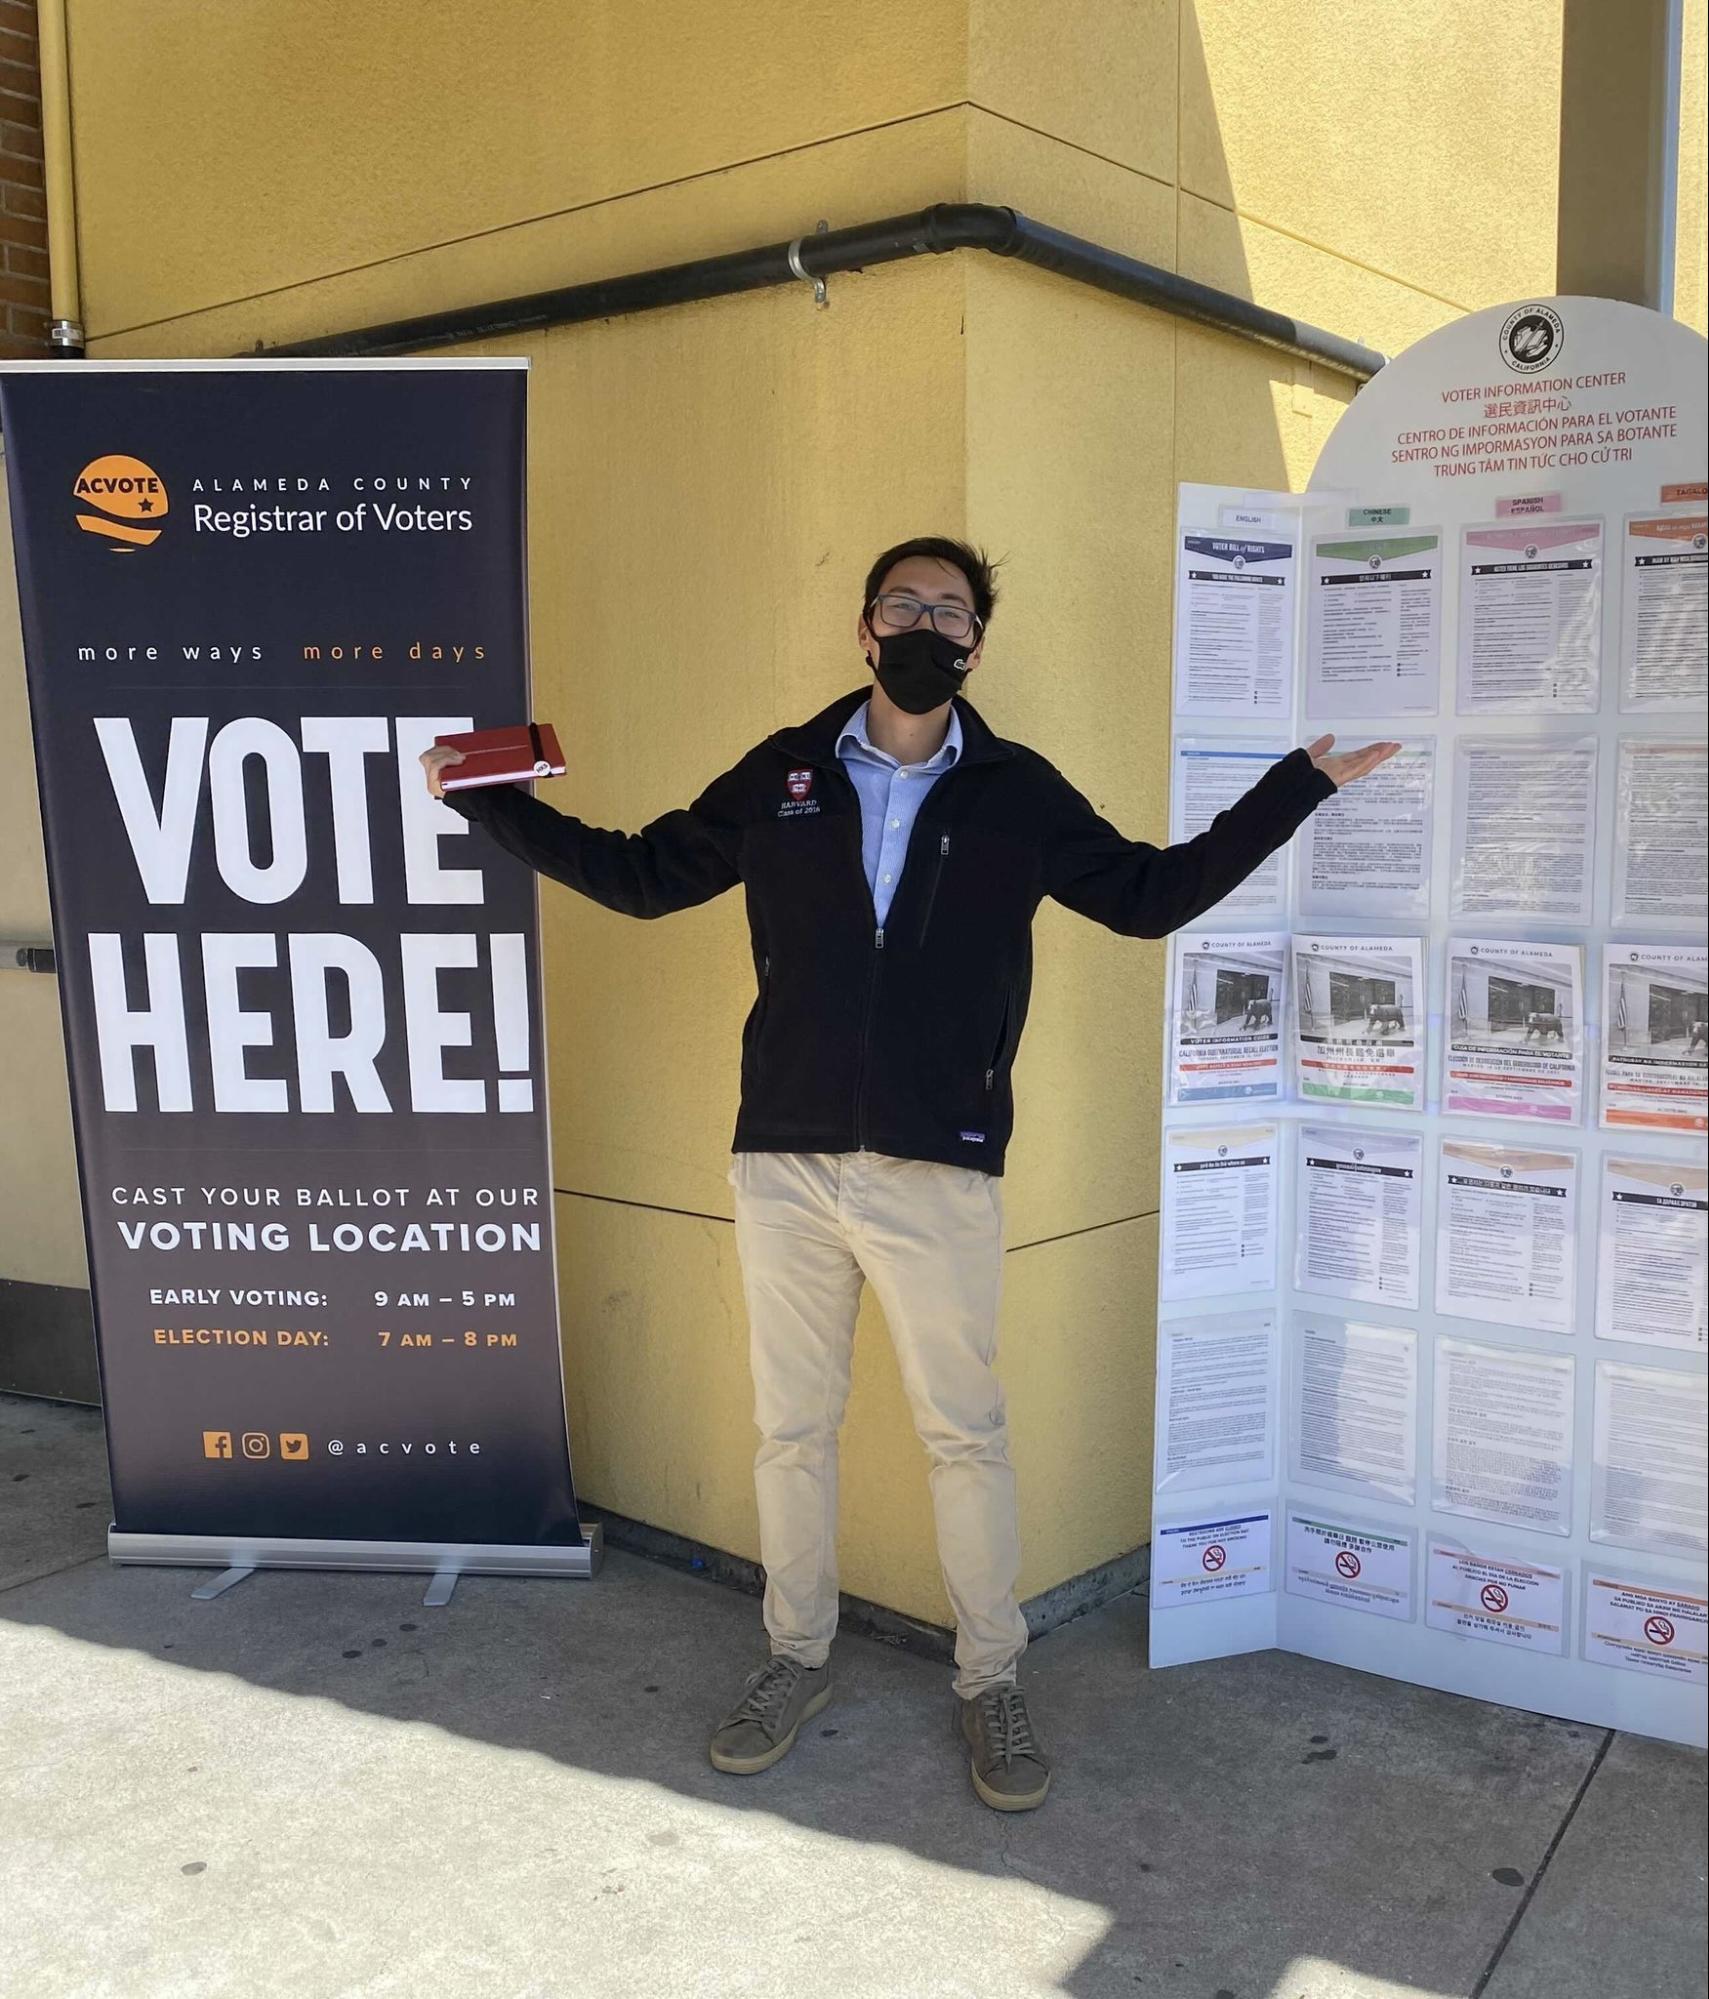 An ALC staff member stands between a "Vote Here" sign and a Voter Information sign at an Alameda voting location.